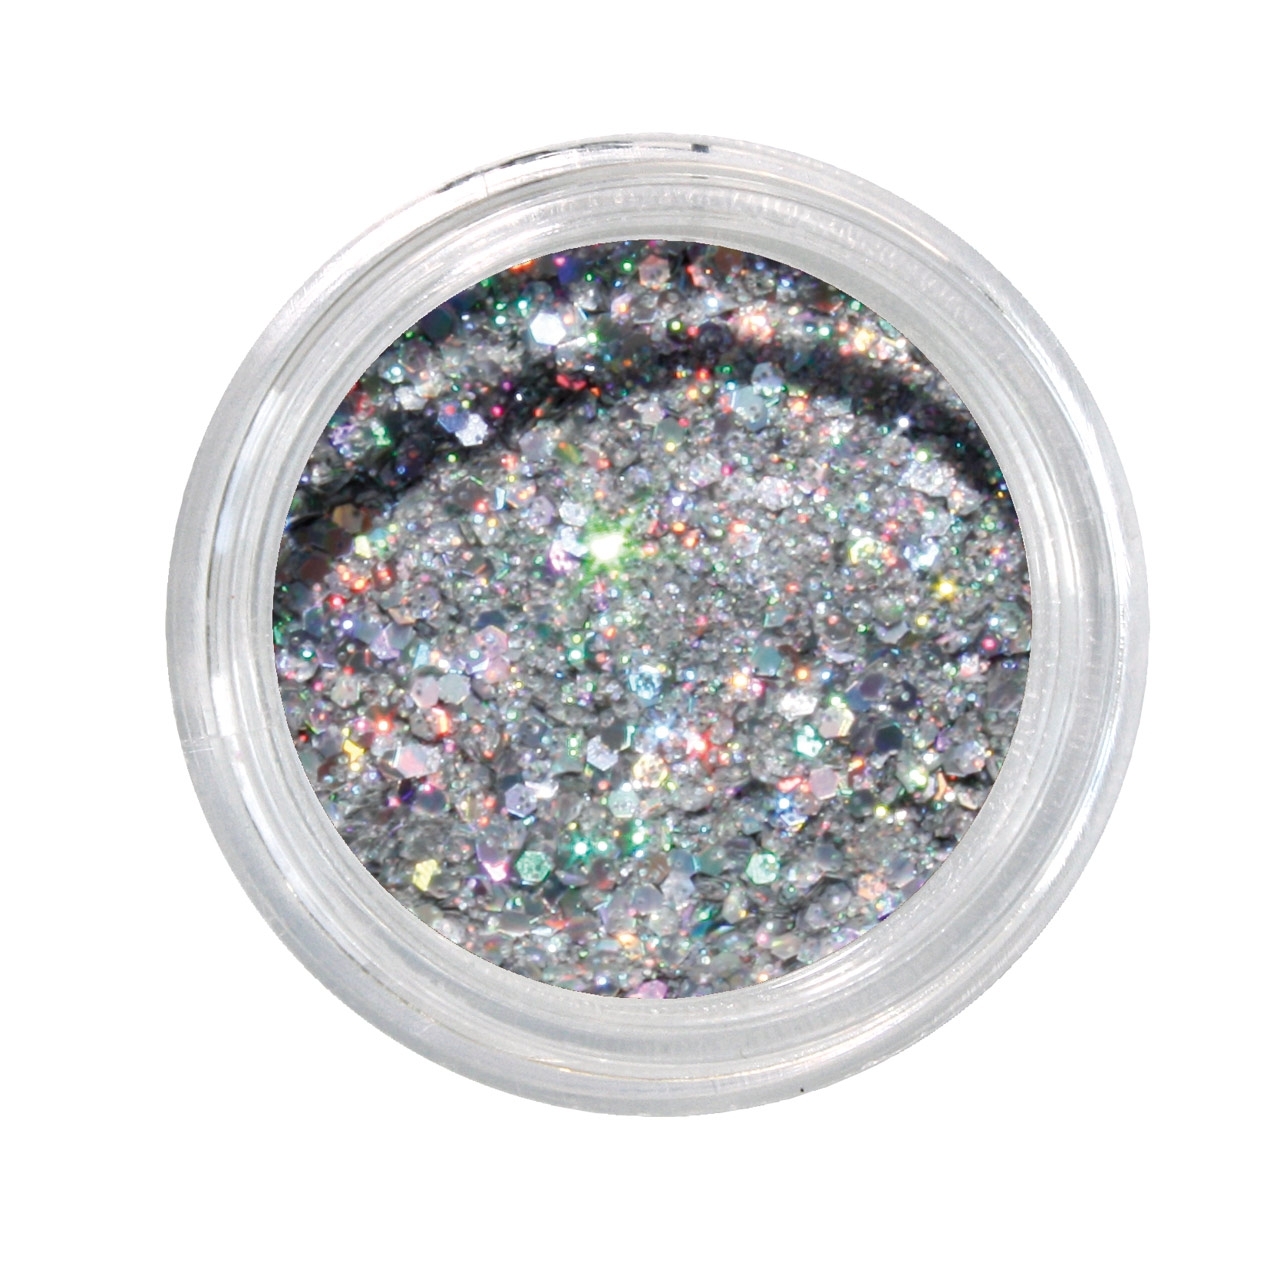 BAEHR BEAUTY CONCEPT NAILS Nailglitter Mini Sechseck silver